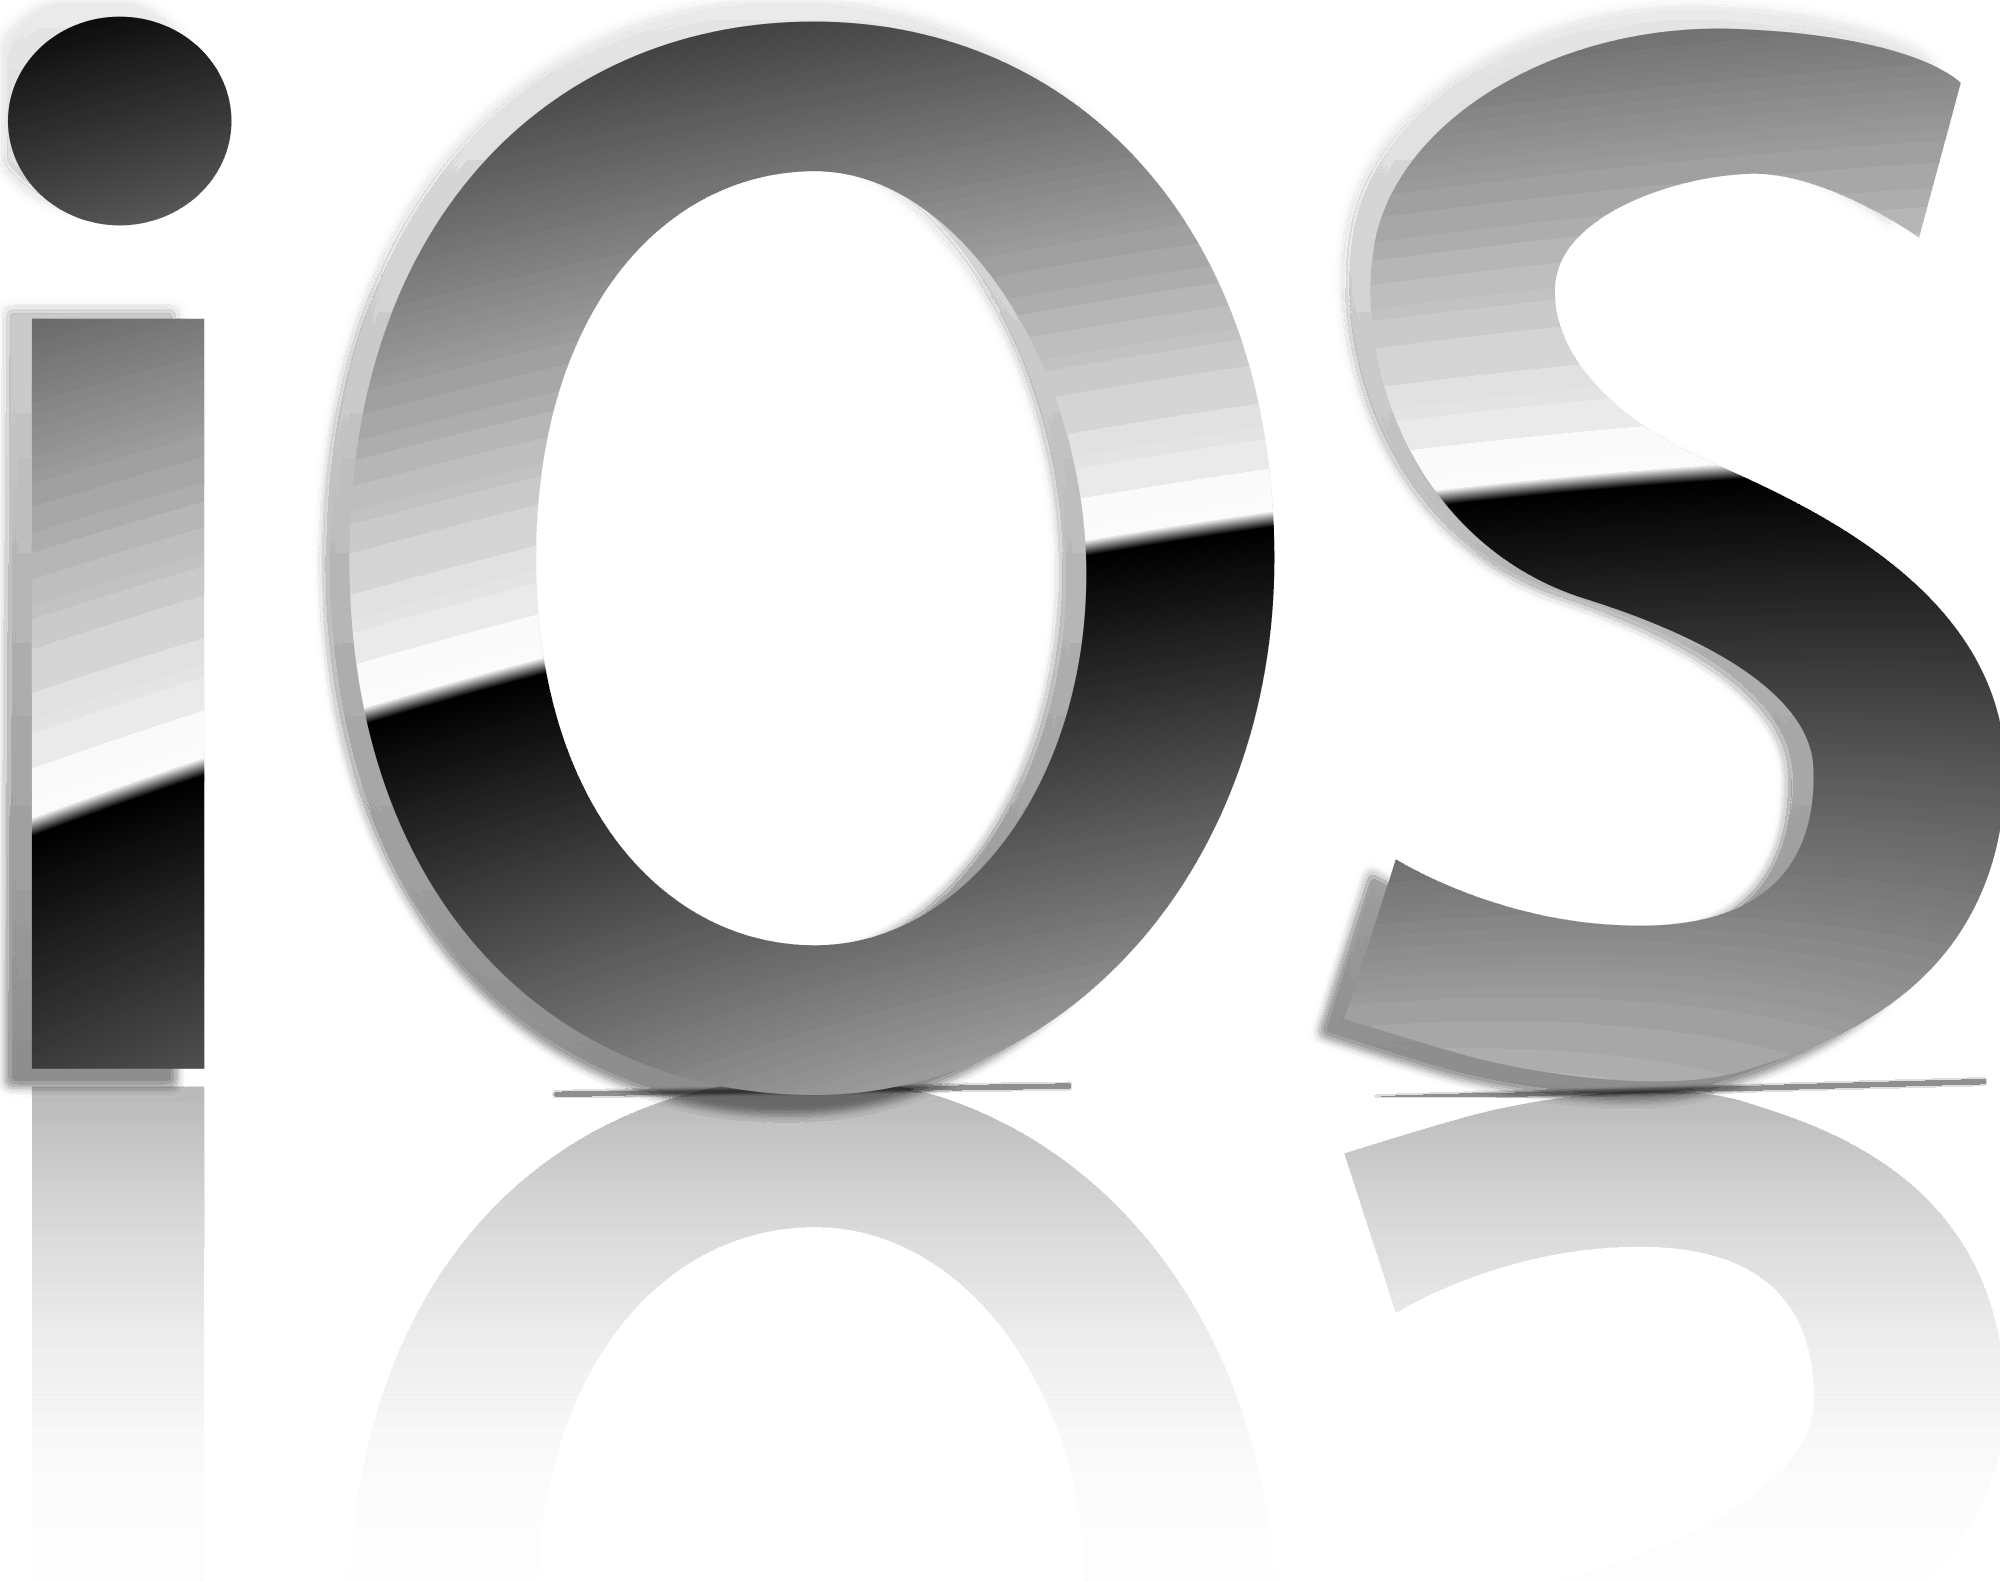 what is the newest mac os version and dates of release